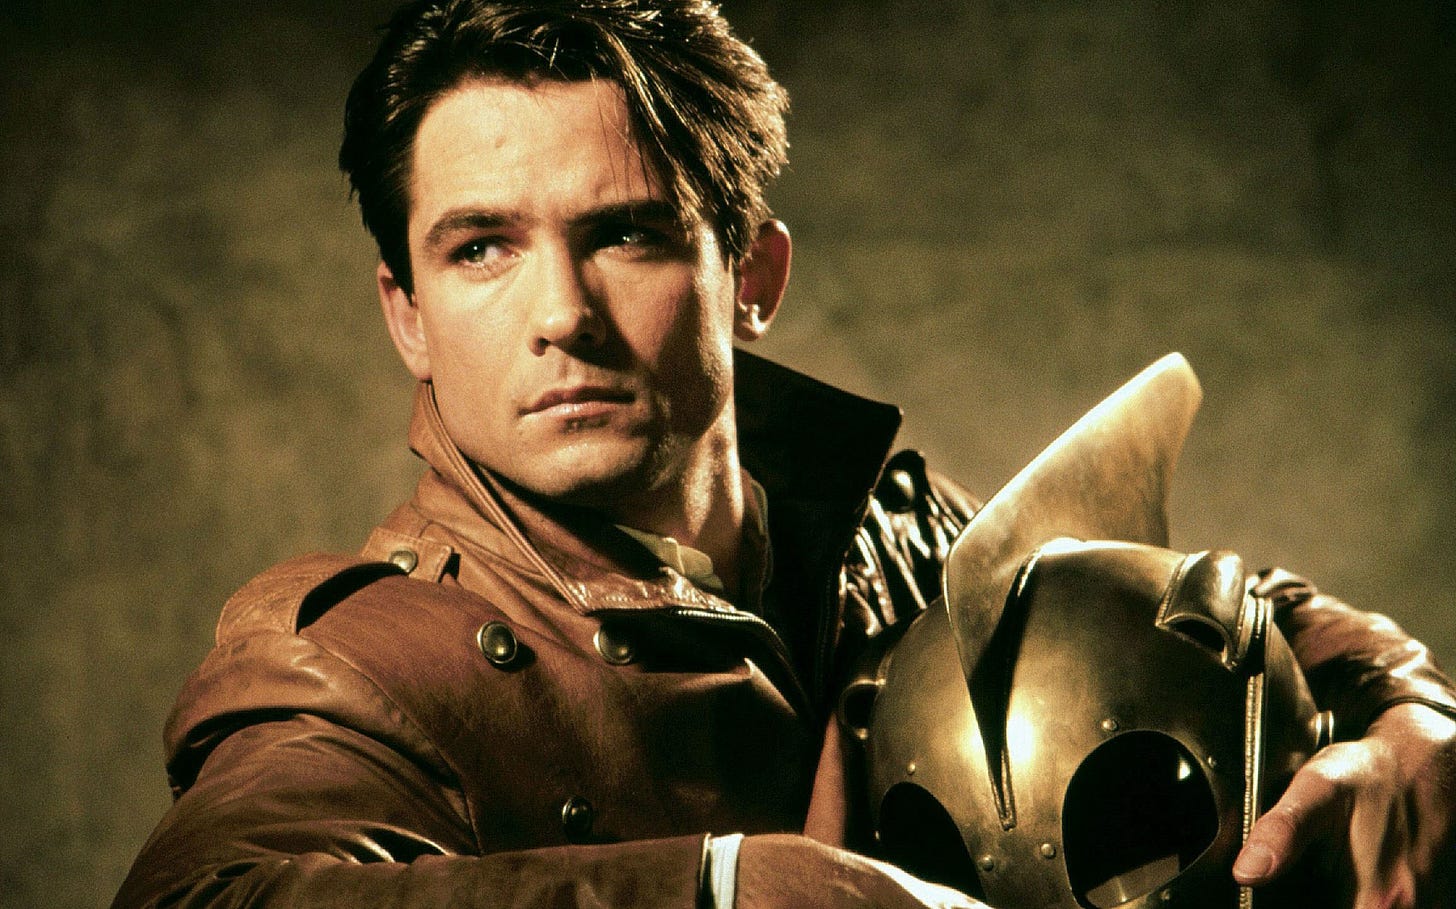 Hollywood's forgotten superhero: why didn't The Rocketeer take off?